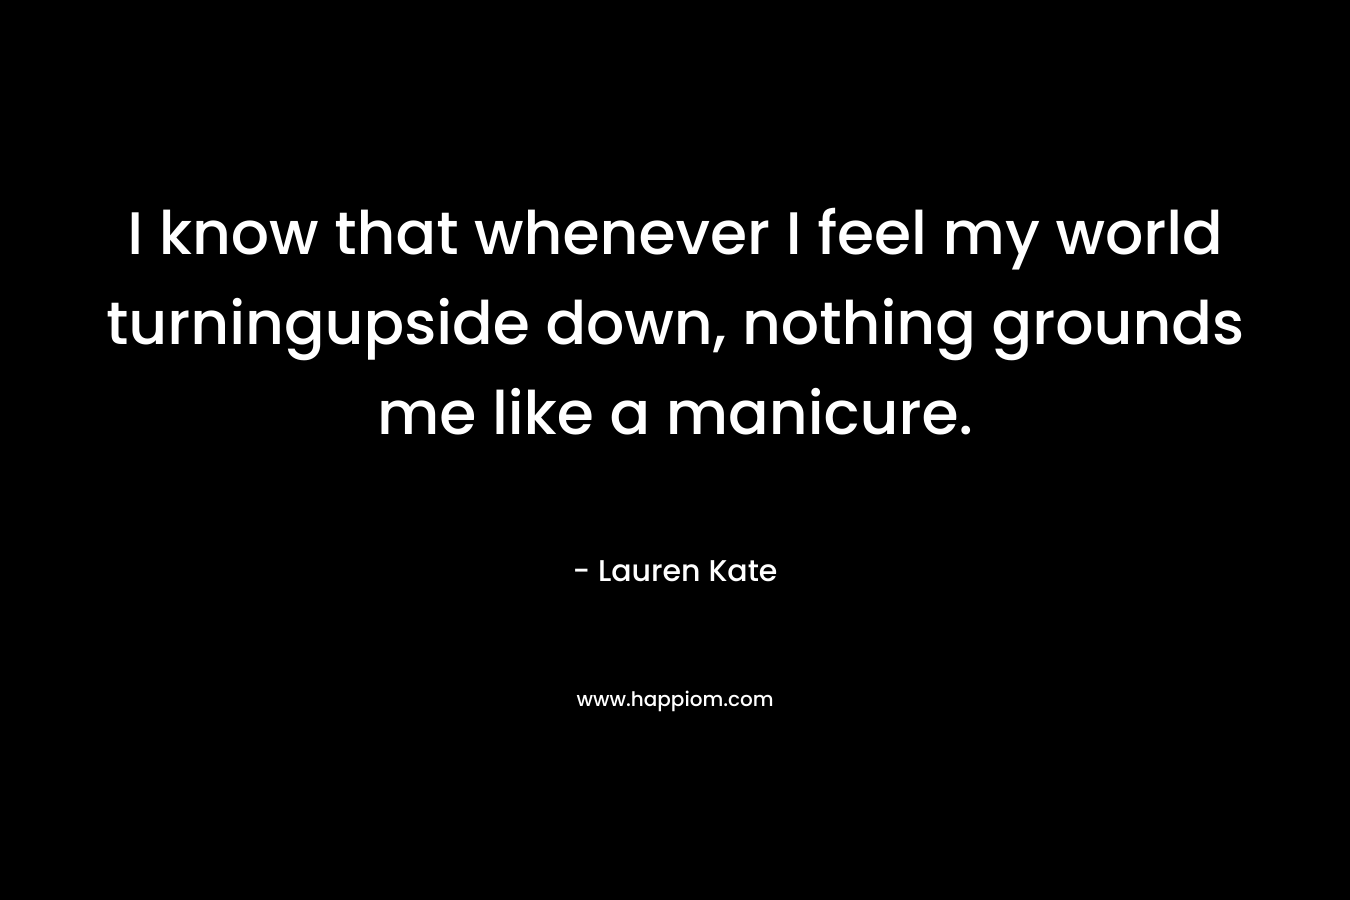 I know that whenever I feel my world turningupside down, nothing grounds me like a manicure. – Lauren Kate